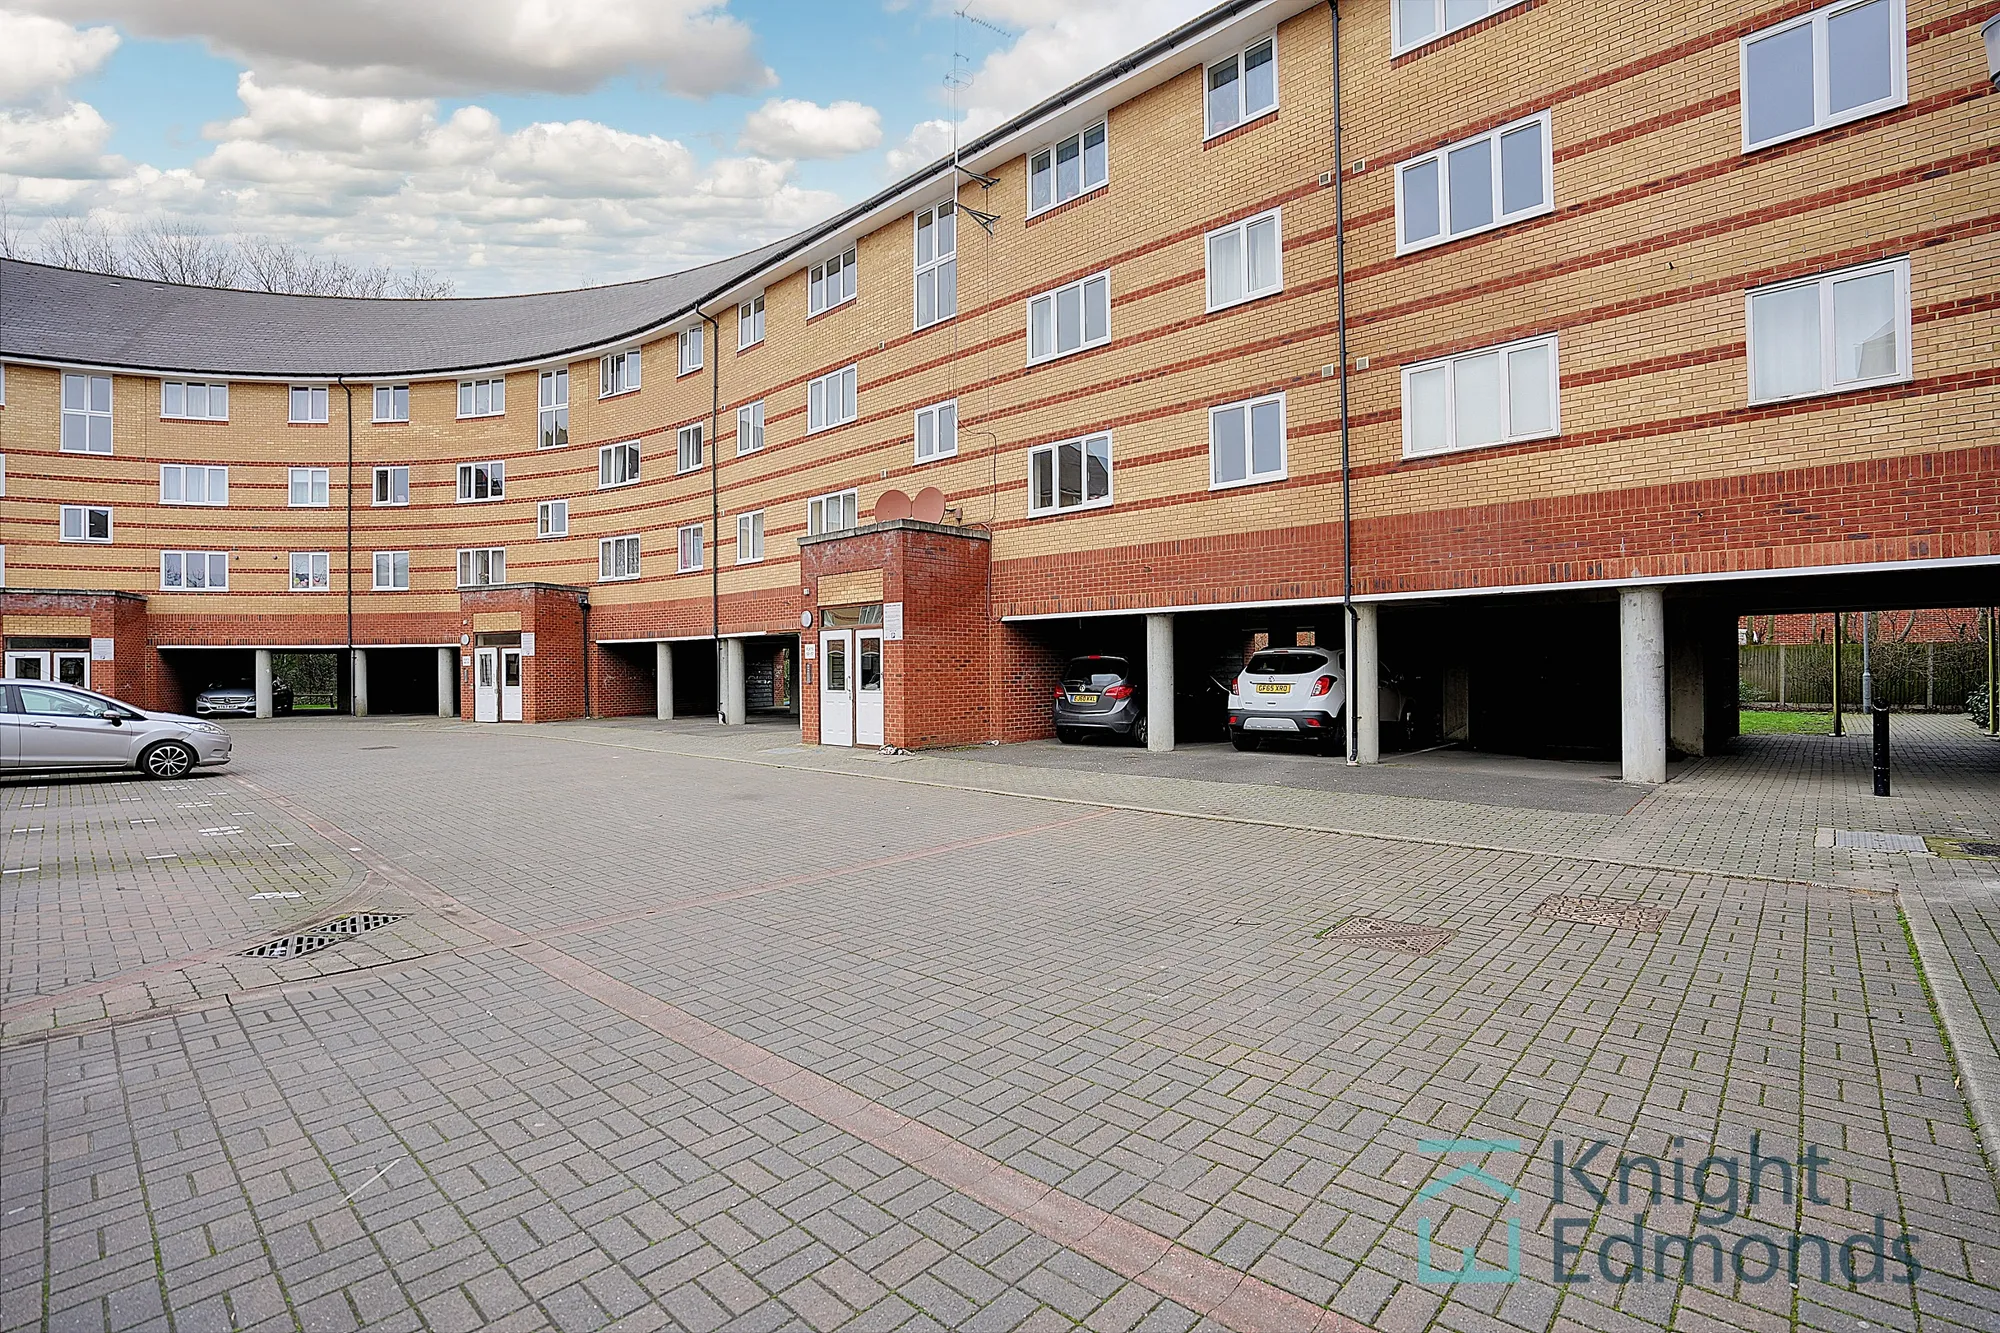 2 bed apartment for sale in St. Peters Street, Maidstone - Property Image 1